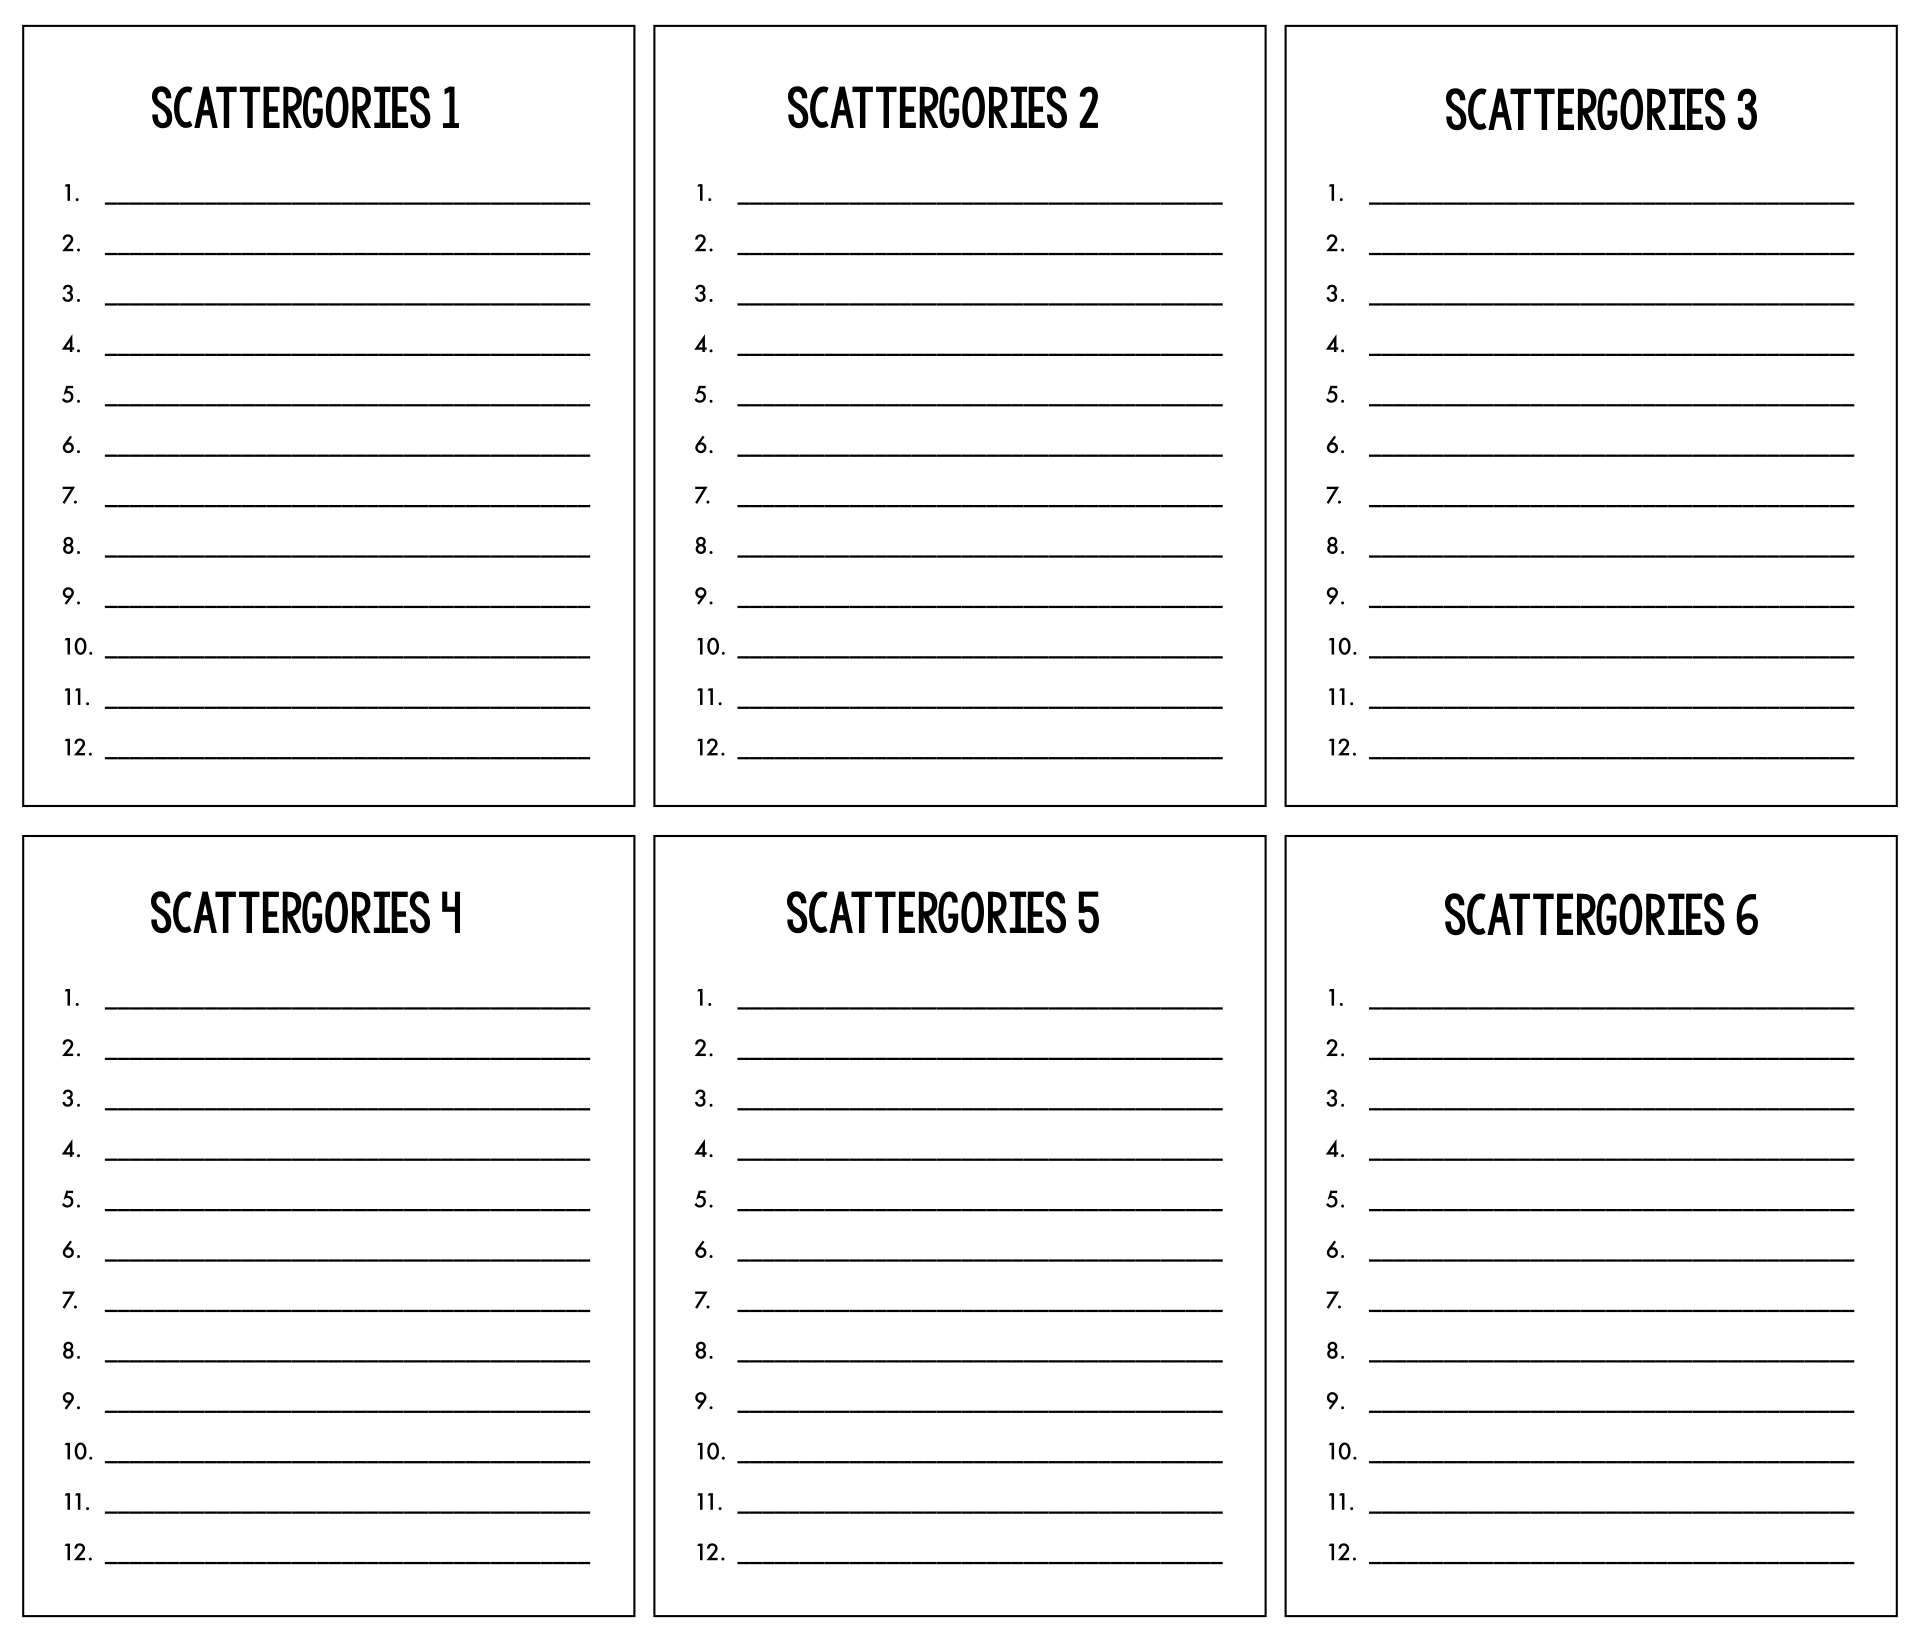 Scattergories Refill Lists/Pads 3 Pack Double Sided 150 Sheets PLEASE READ DESC 